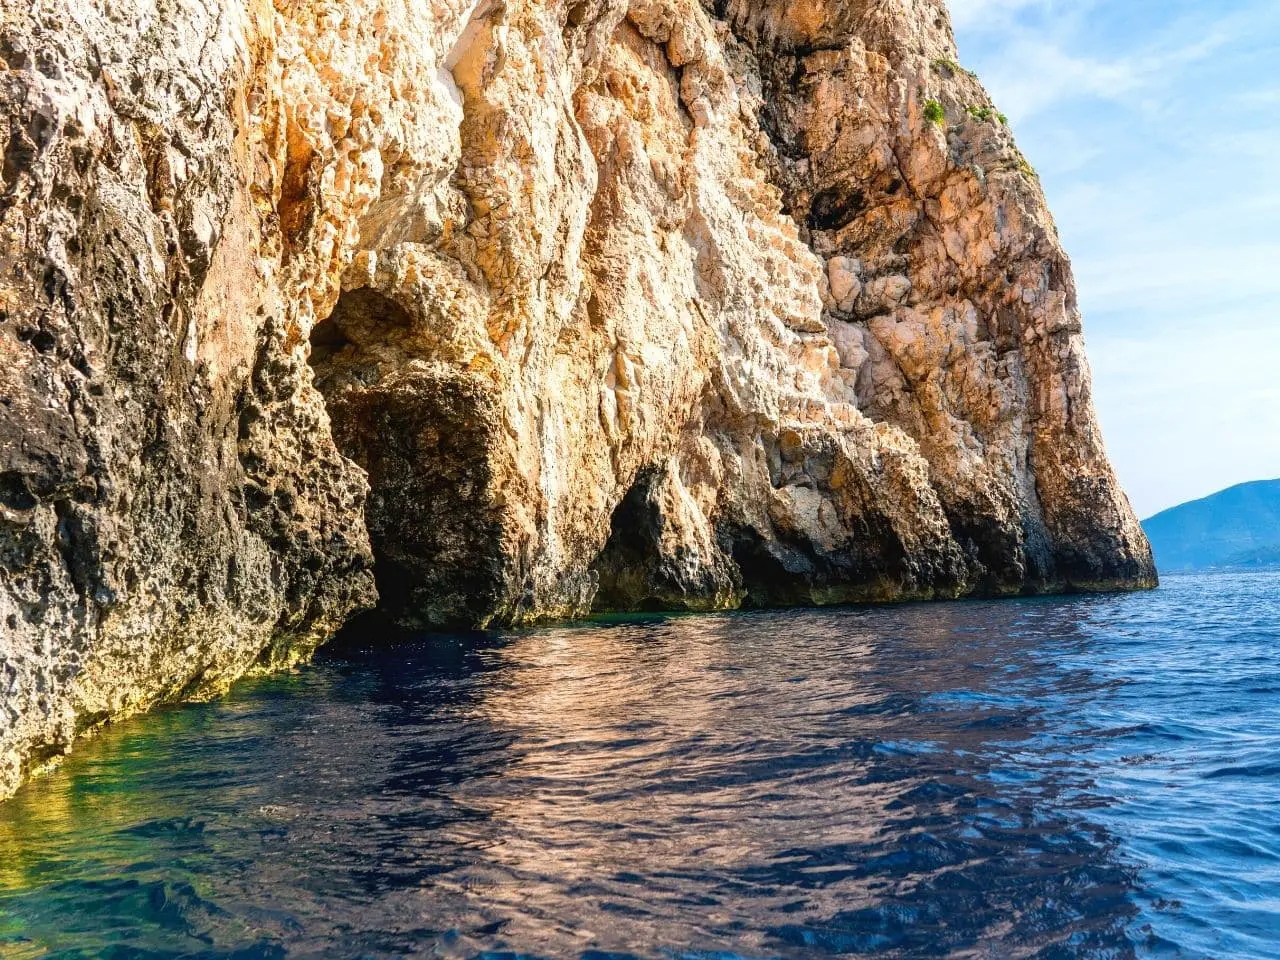 The entrance to the Blue Cave in Croatia